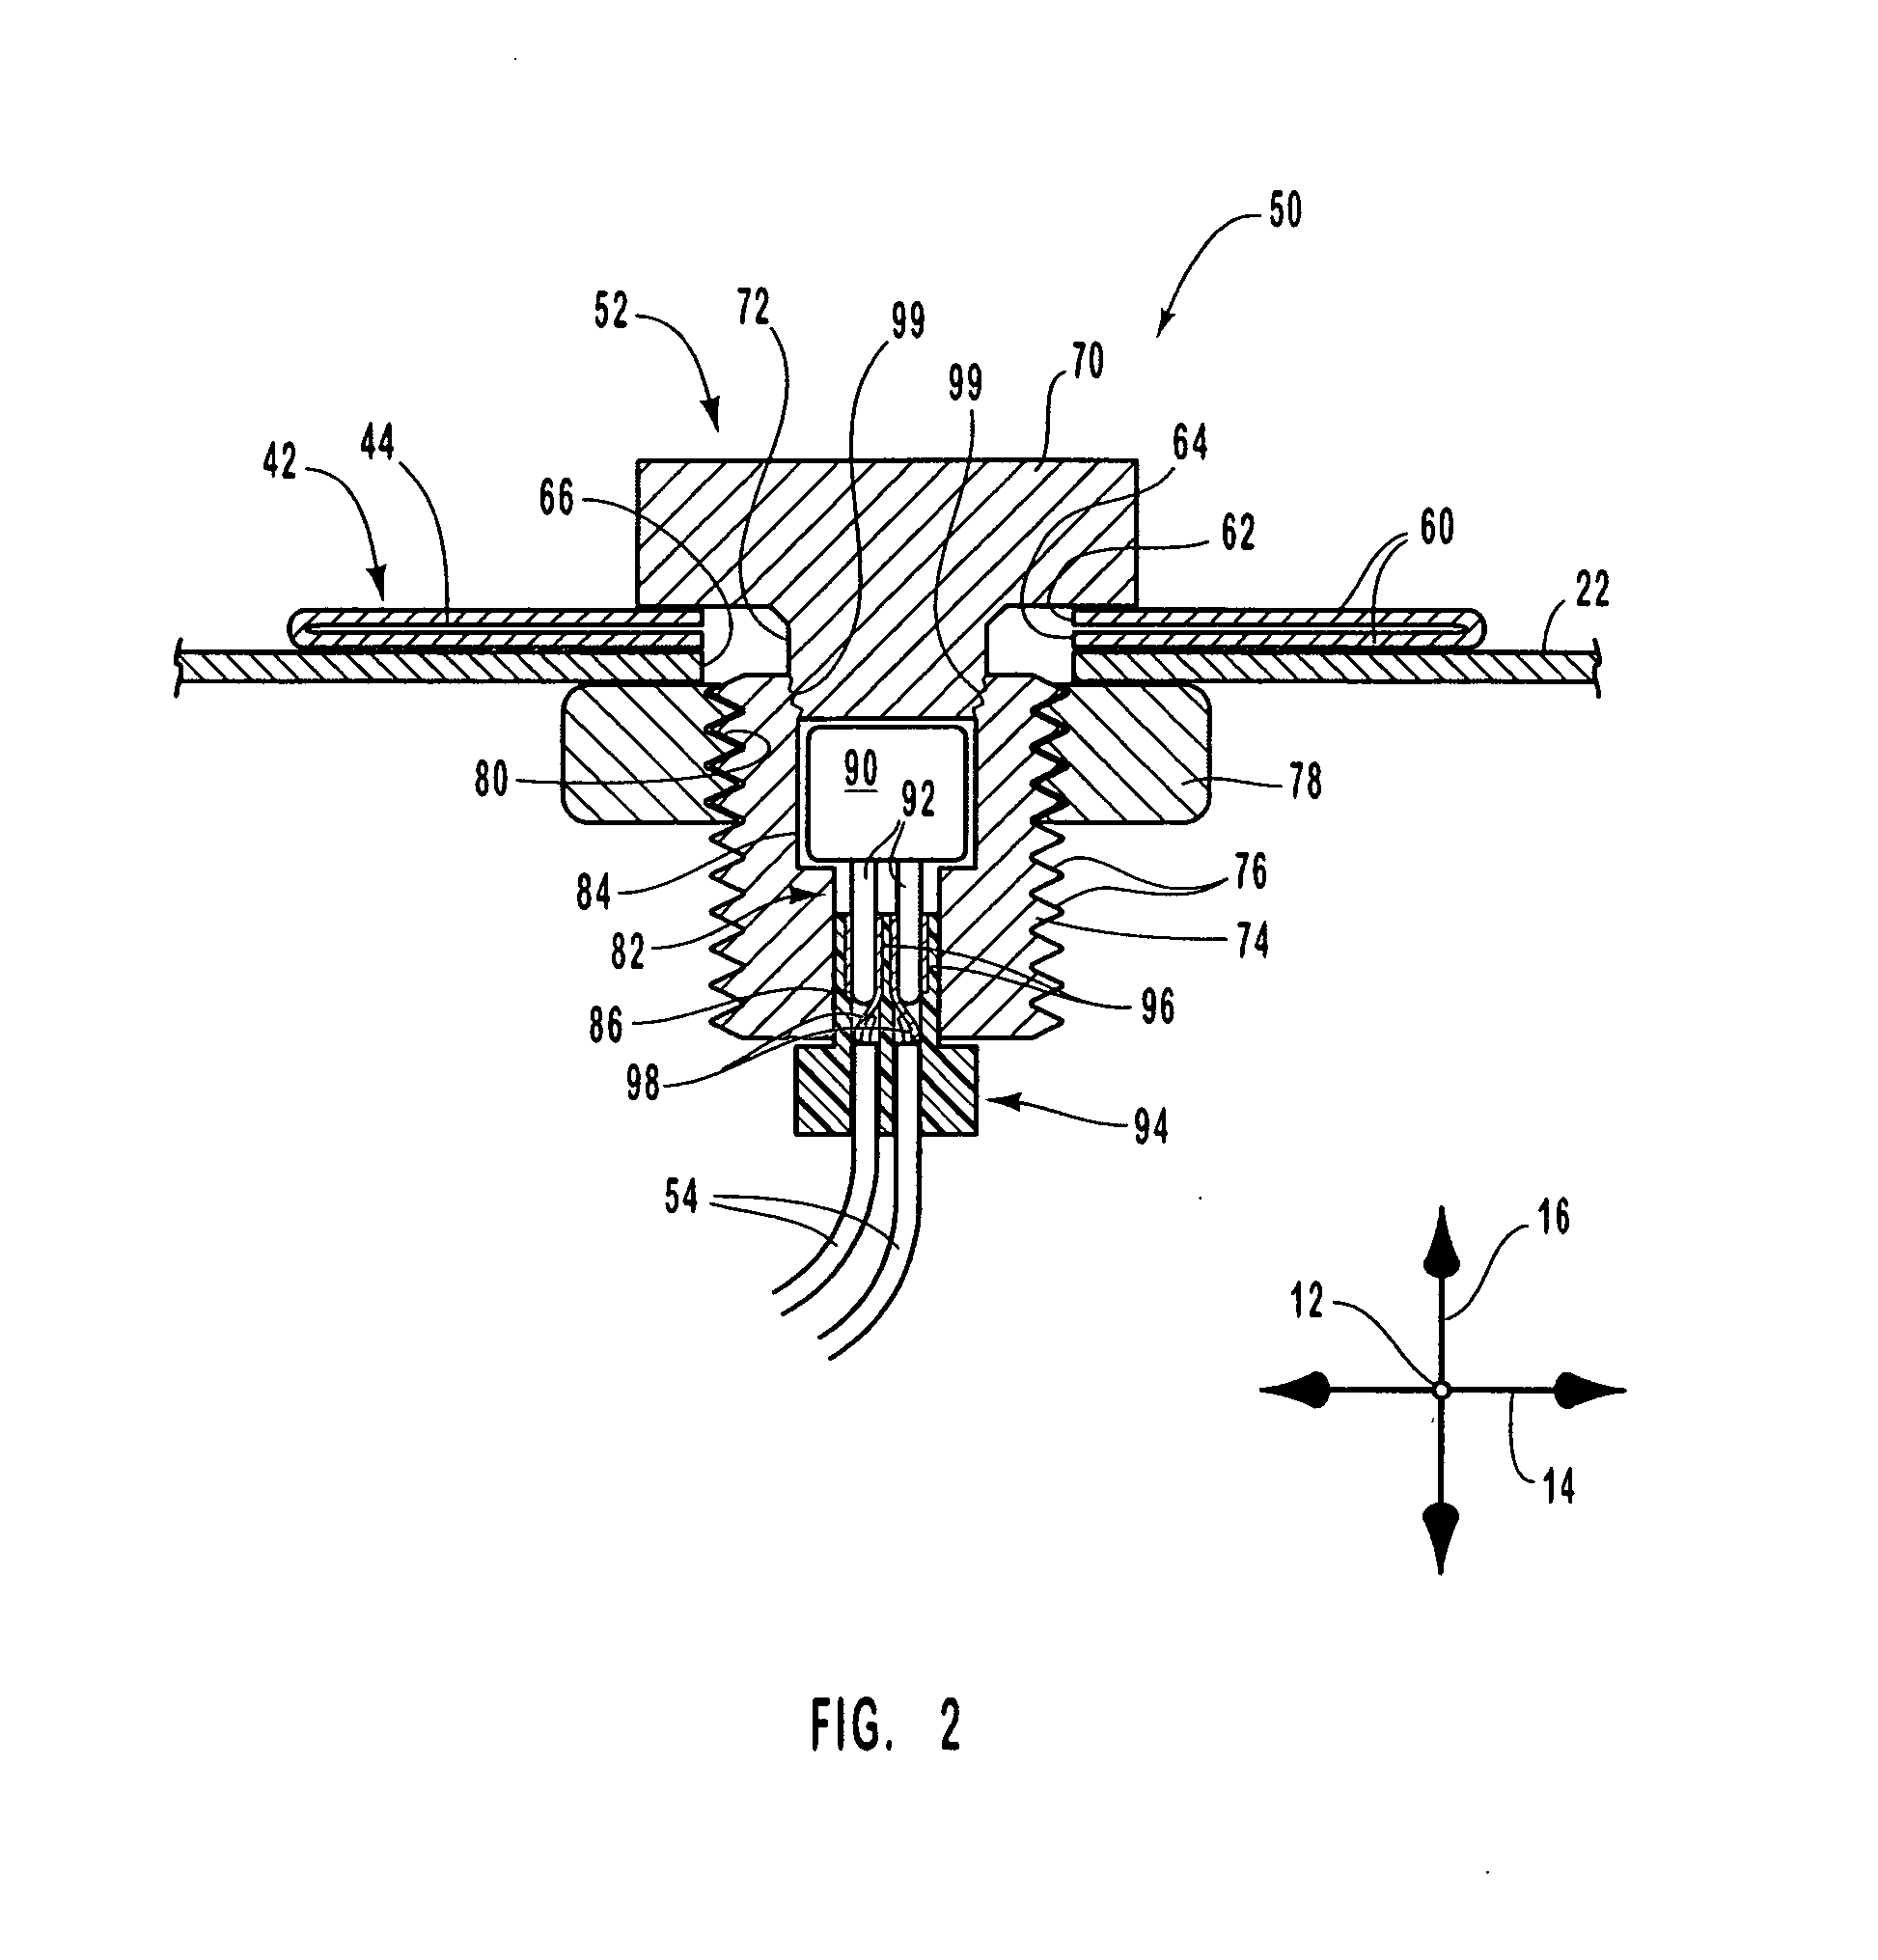 Active venting apparatus and method for airbag systems